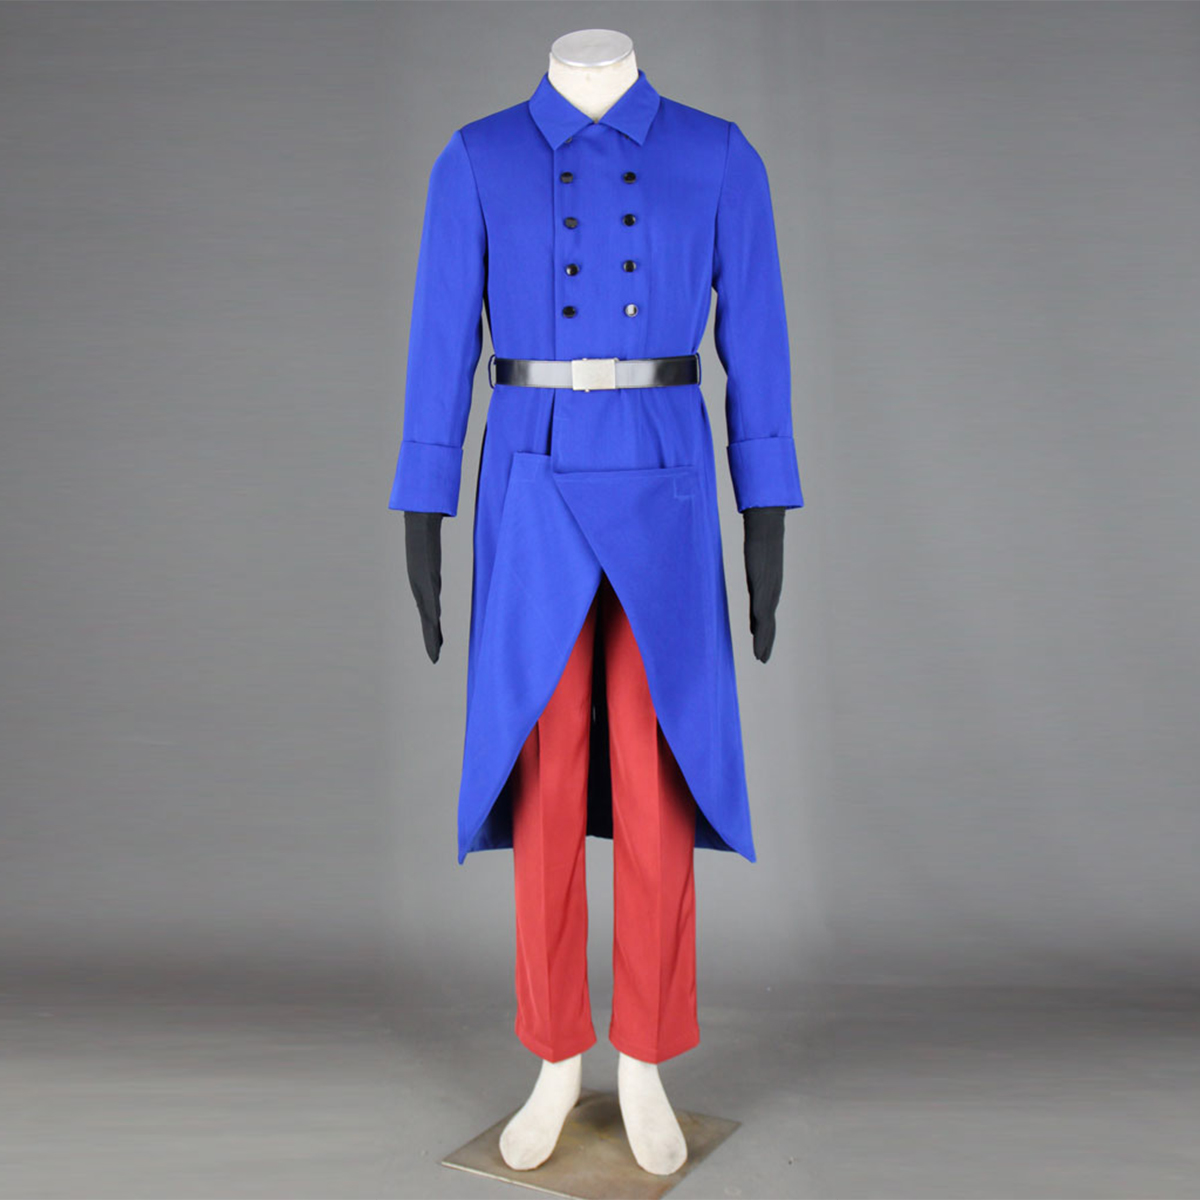 Axis Powers Hetalia France Francis Bonnefeuille 1 Anime Cosplay Costumes Outfit